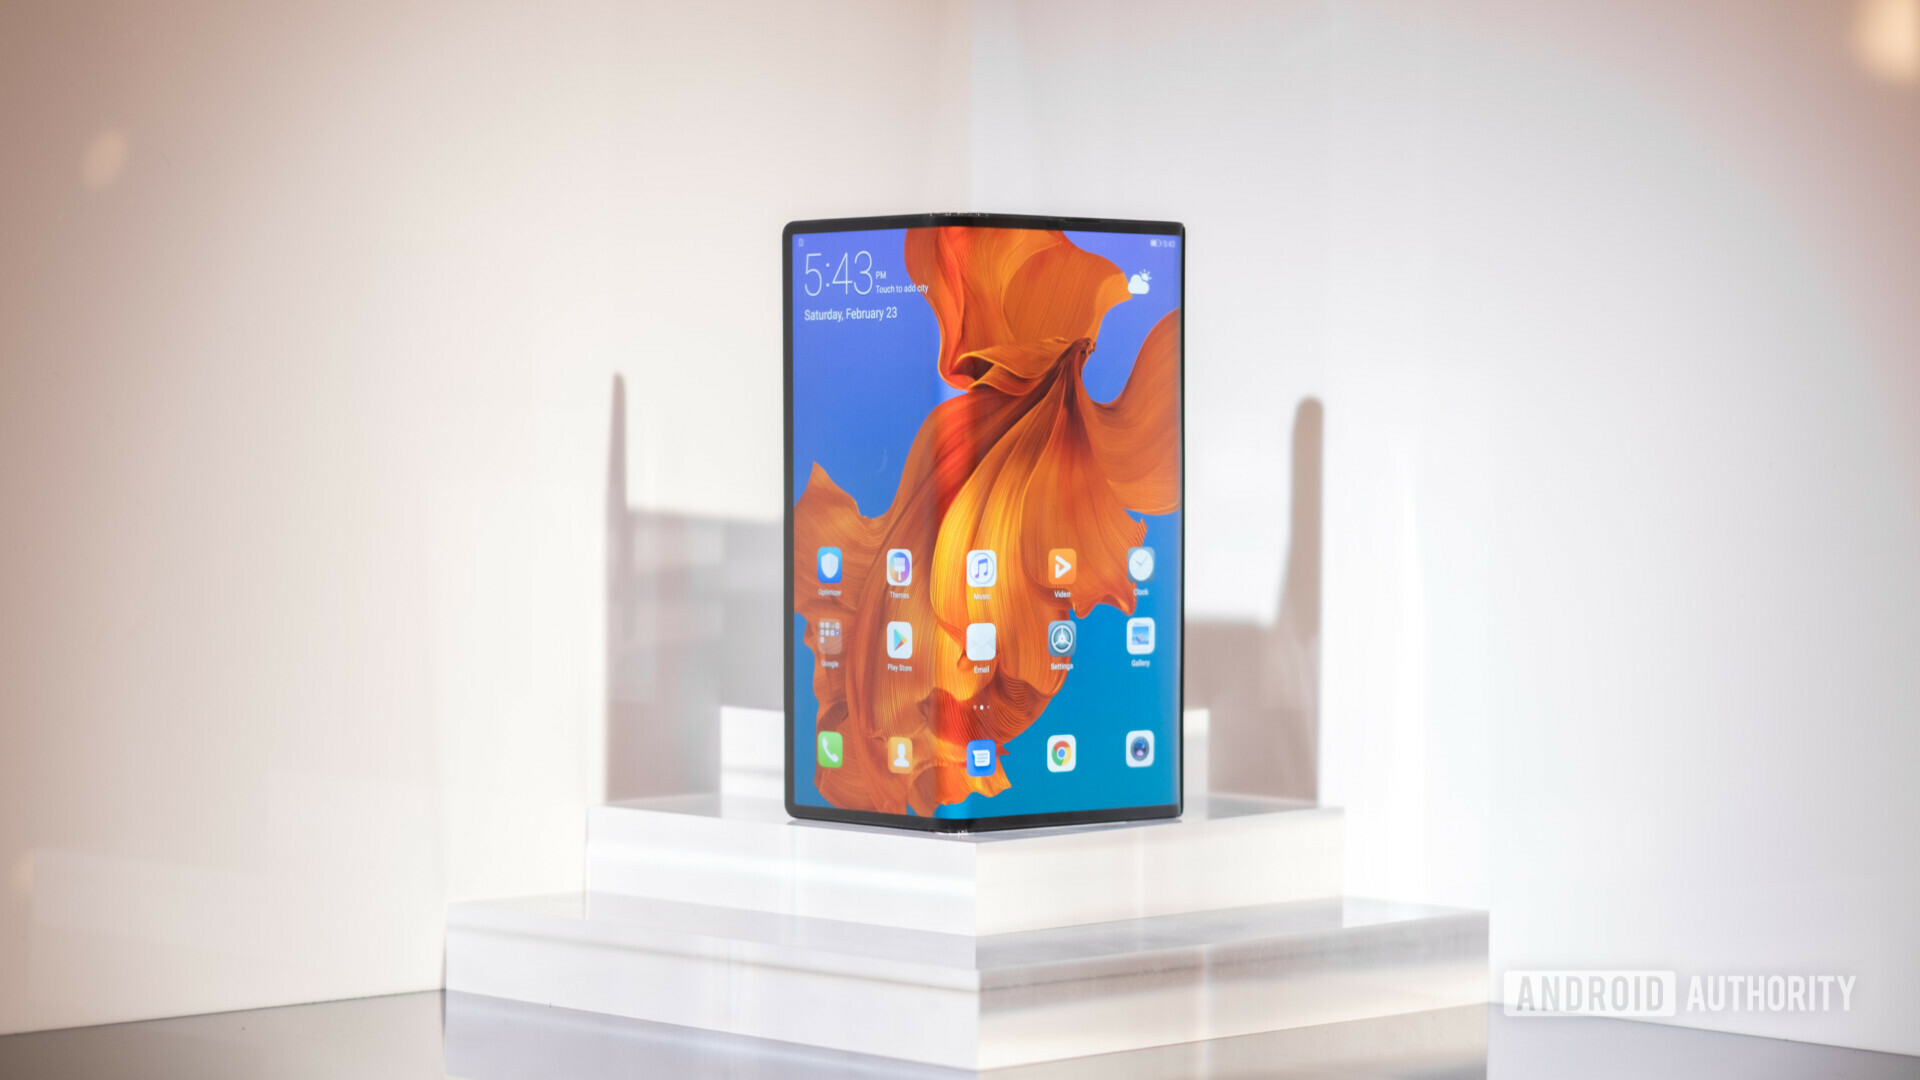 HUAWEI Mate X, a foldable 5g phone showcased at MWC 2019.